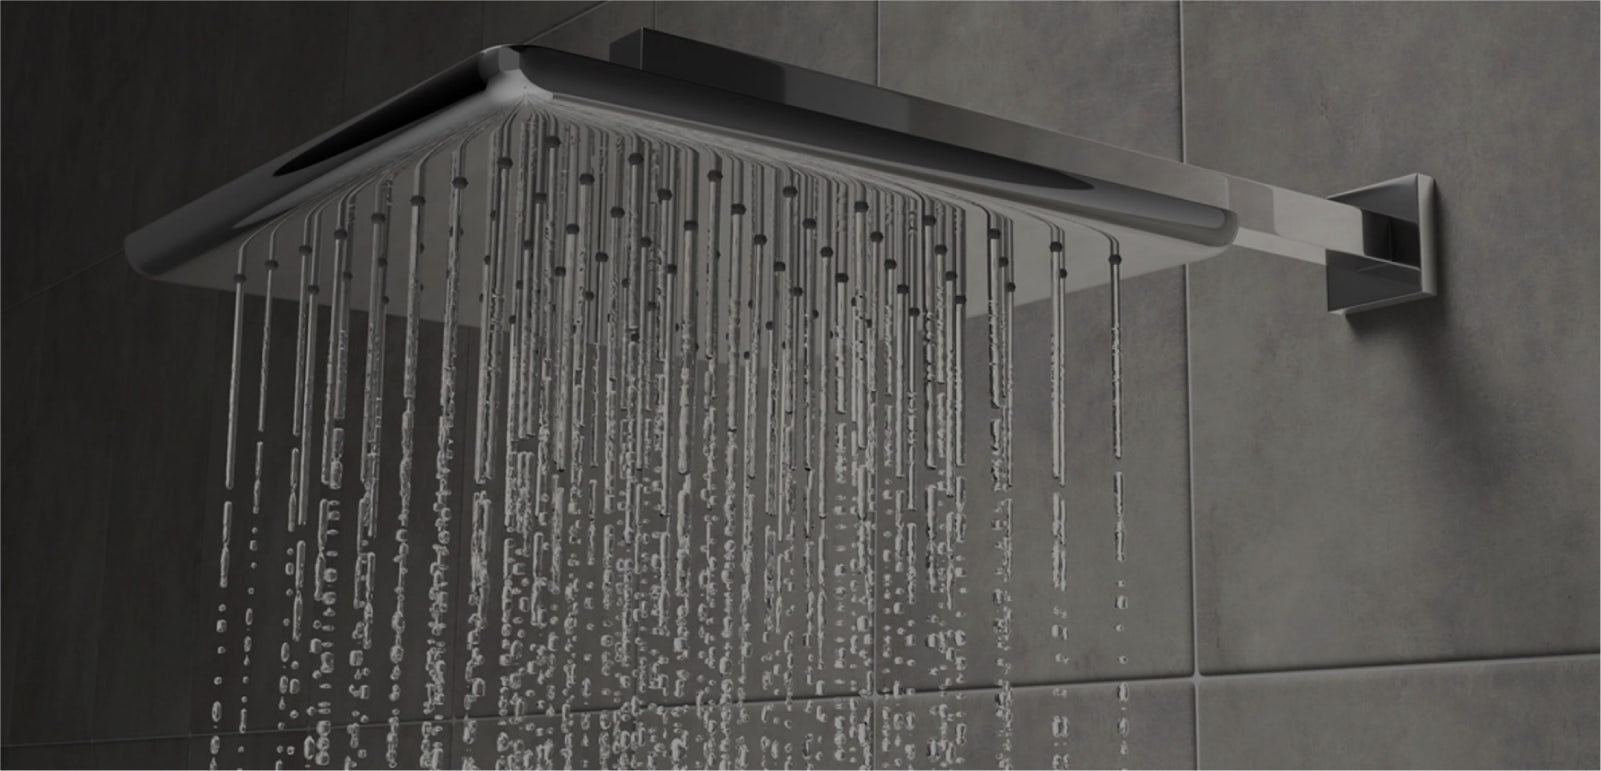 A good shower. Shower Black and White. Jacuzzi Flexa фильтр. Jacuzzi Flexa Tower фильтр. White Rain Showers.